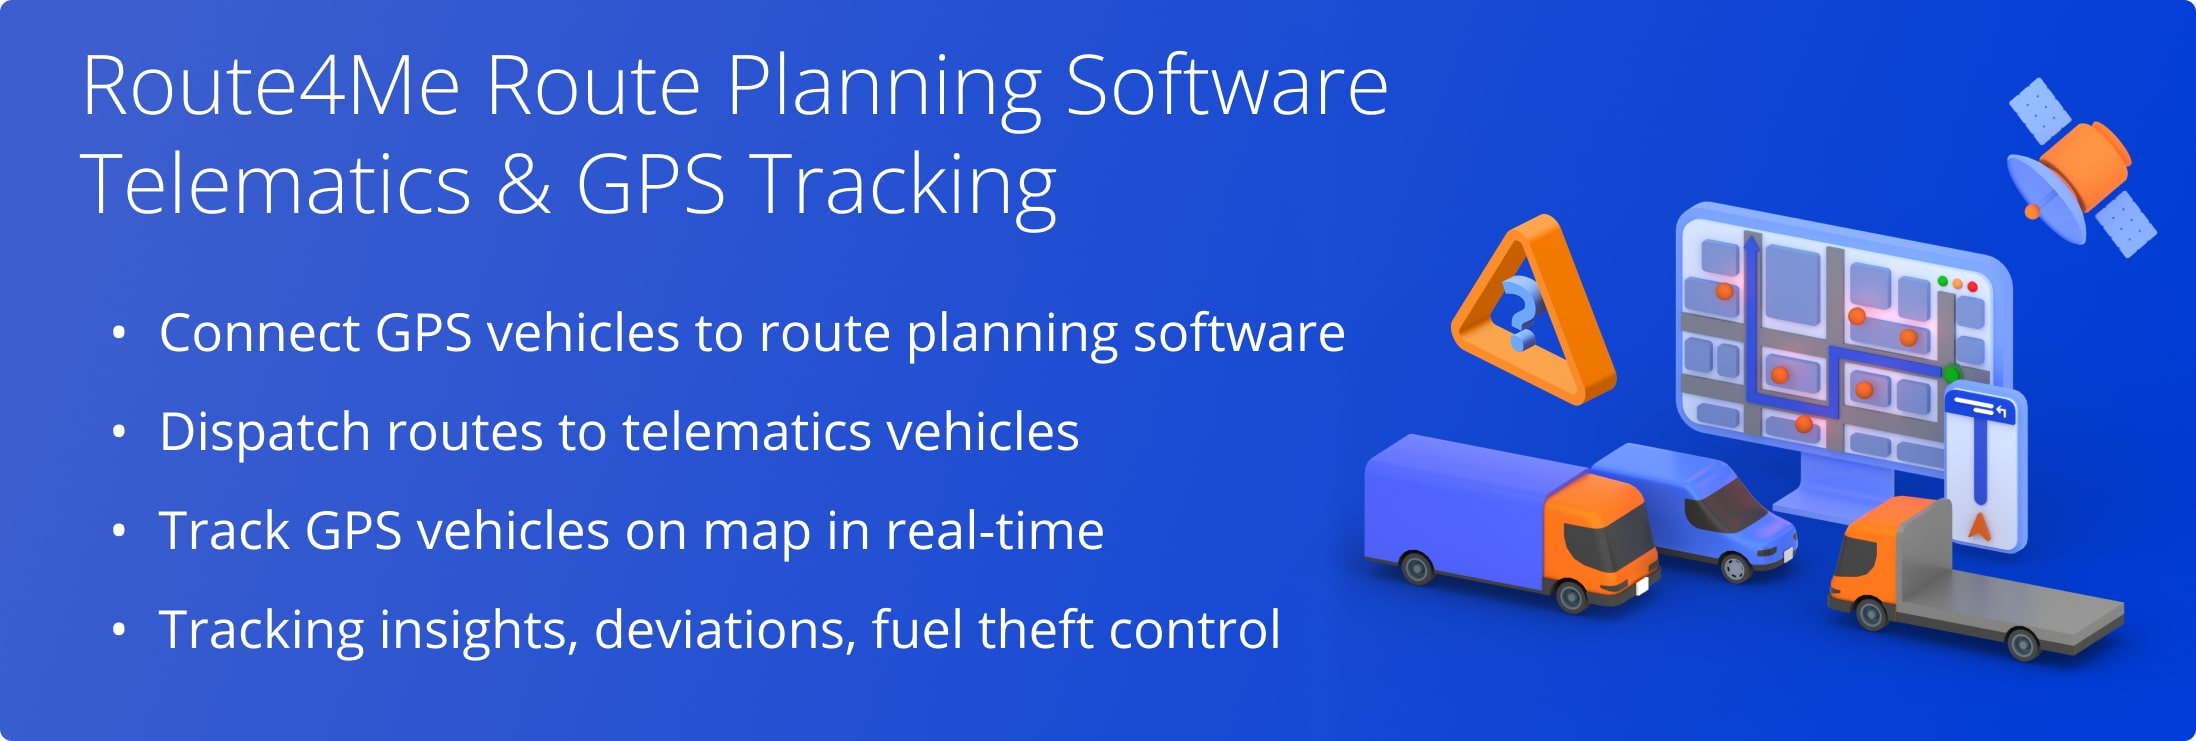 Route4Me Fleet Management Software: Connect telematics vehicles, dispatch last mile routes to vehicles, and track GPS vehicles on a map in real-time.